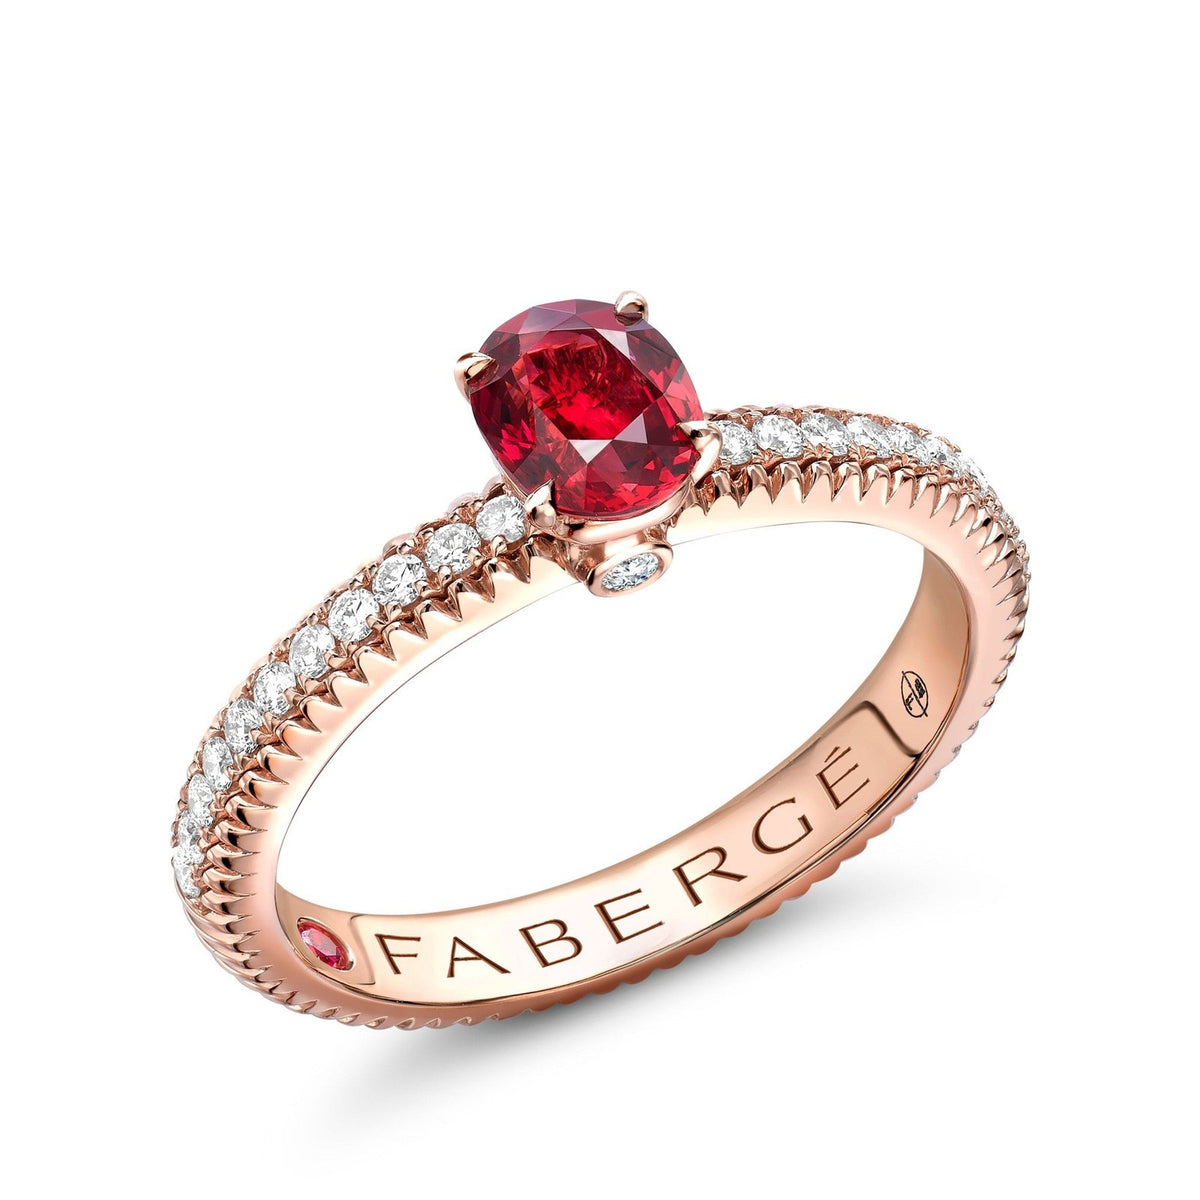 Faberge Colours of Love Rose Gold Ruby Fluted Ring with Diamond Shoulders - 831RG2513